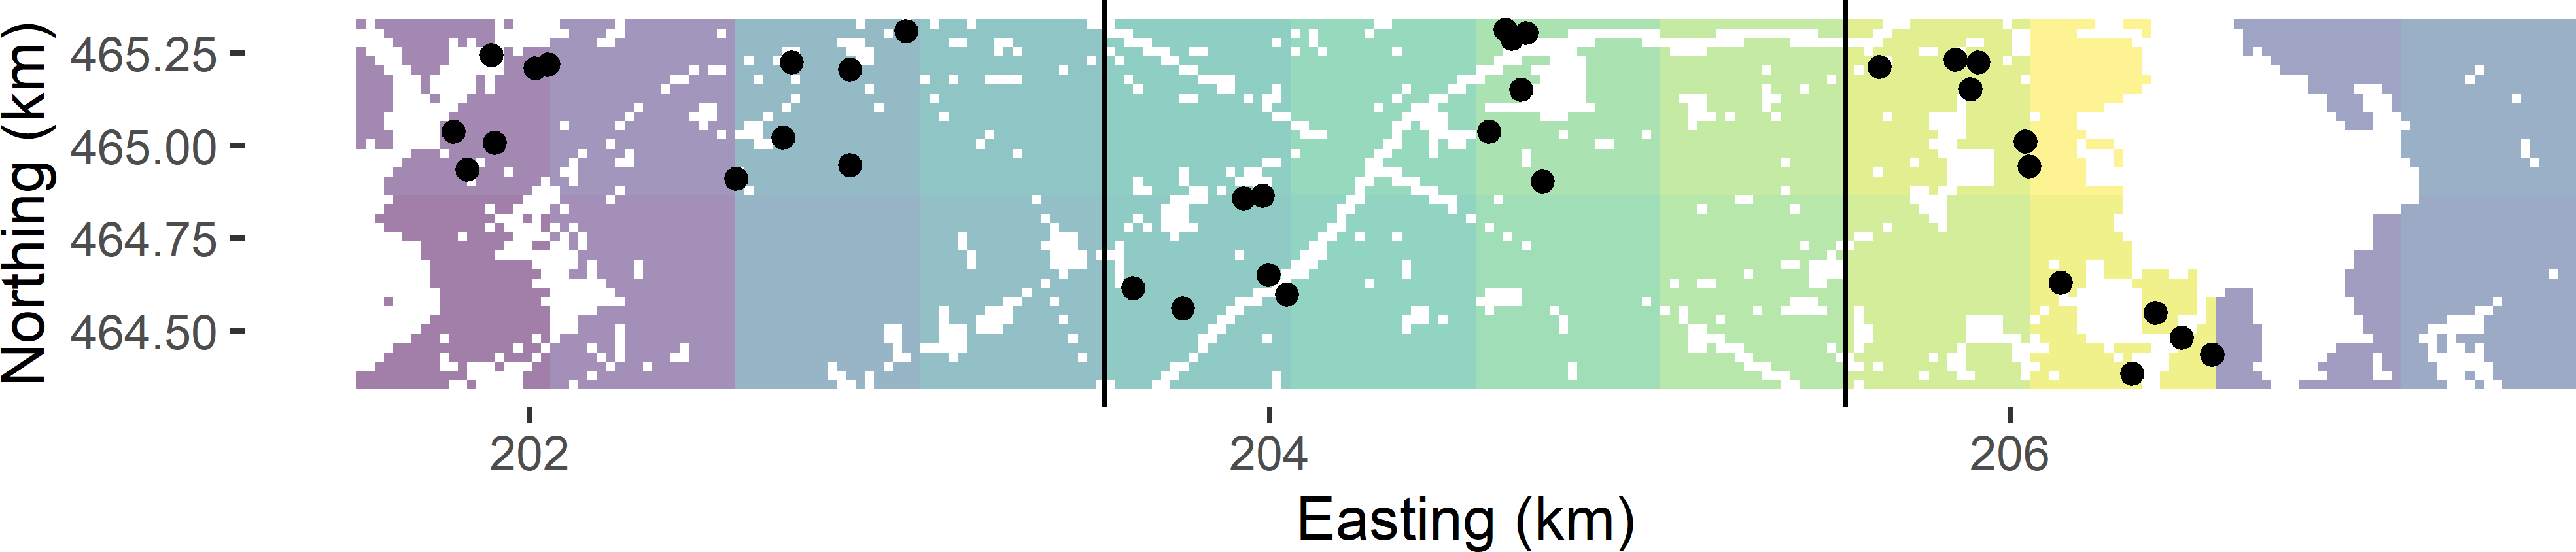 Stratified two-stage random sample from Voorst. Strata are groups of eight PSUs (0.5 km squares) within 2 km $\times$ 1 km blocks. From each stratum two times a PSU is selected by ppswr, and six SSUs (points) are selected per PSU draw by simple random sampling.